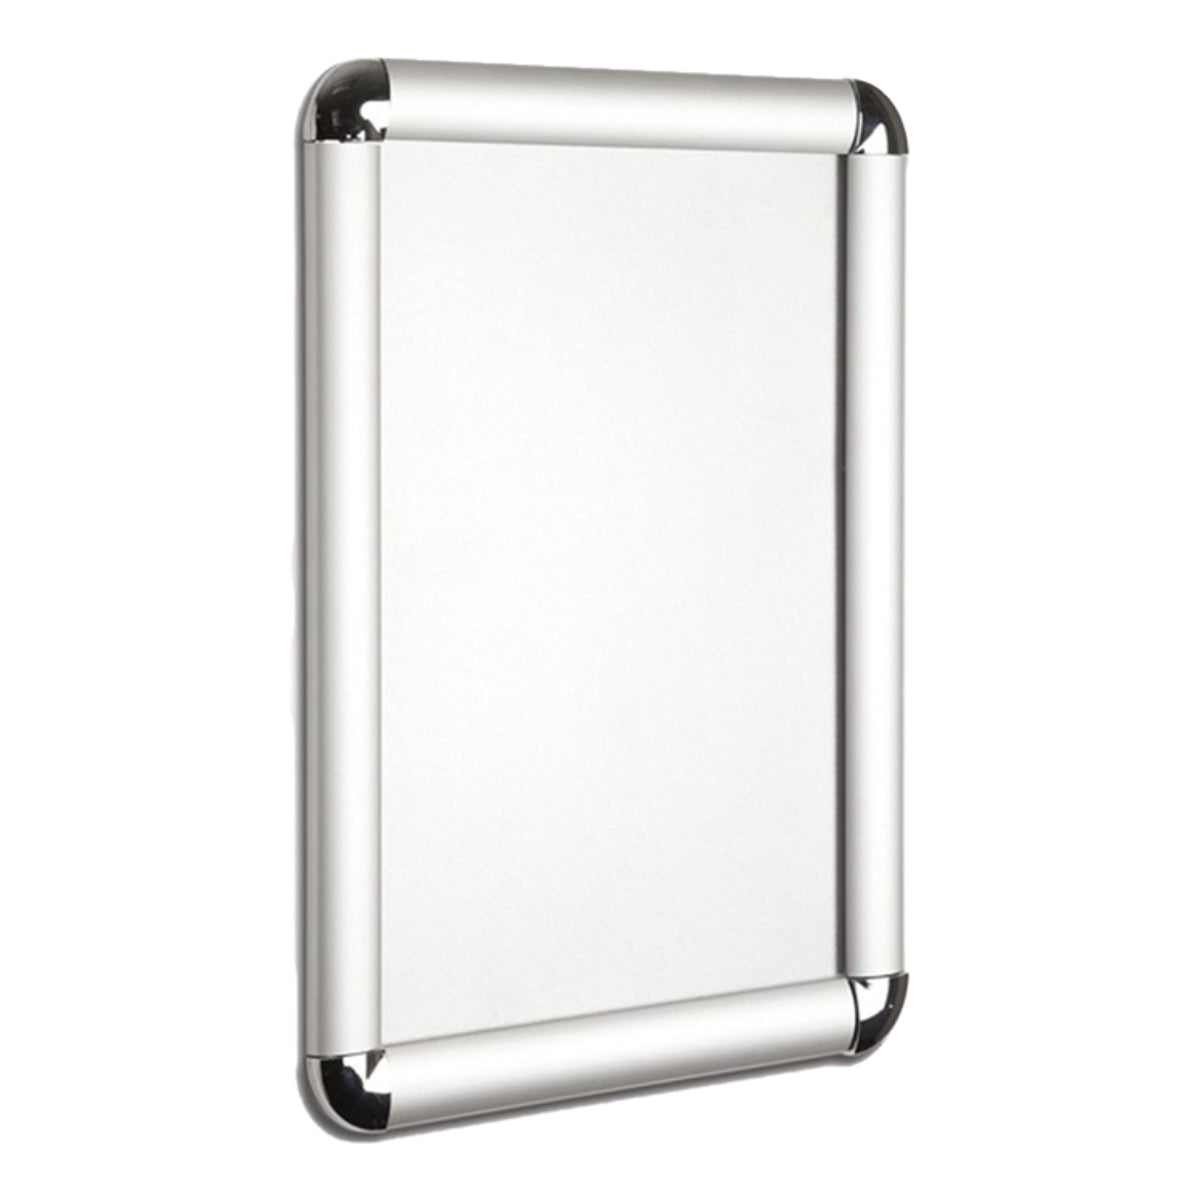 Alu Snap Frame Wall A4, rounded corner, 30mm profile, Silver anodized